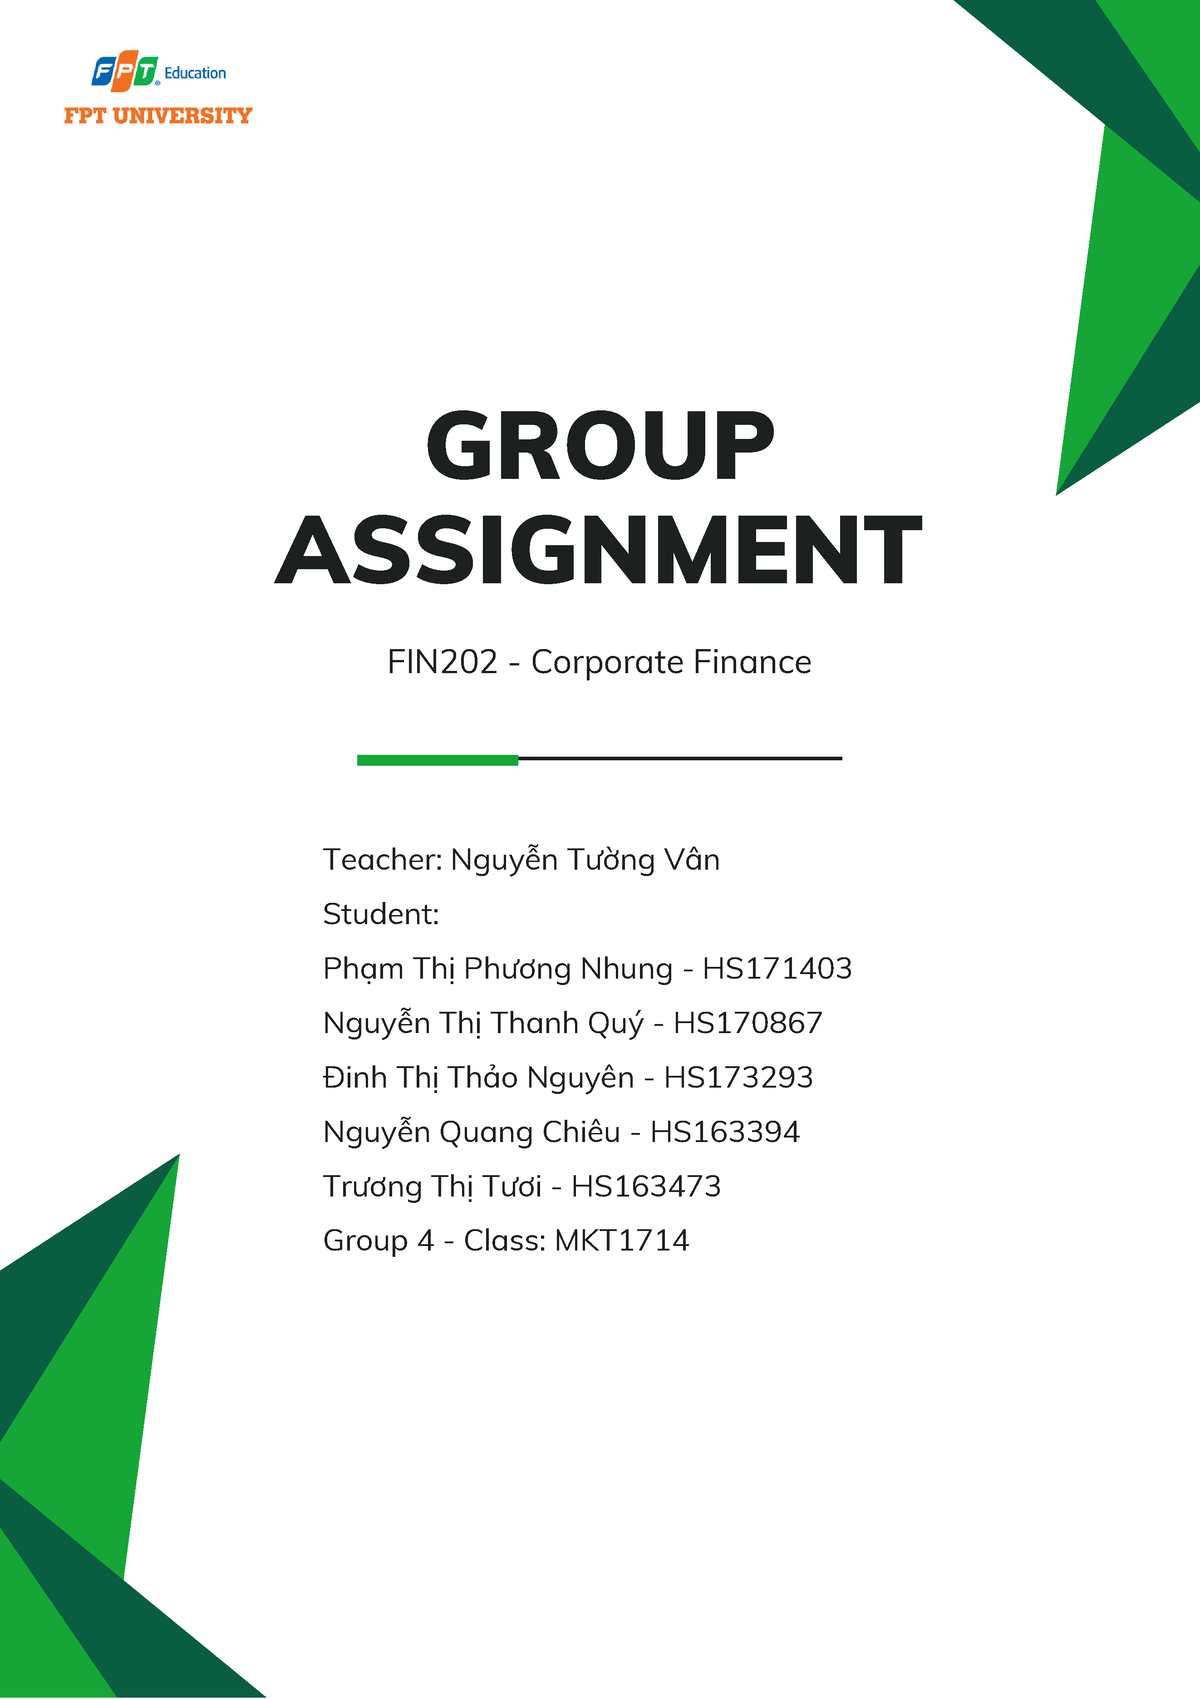 group assignment fin202